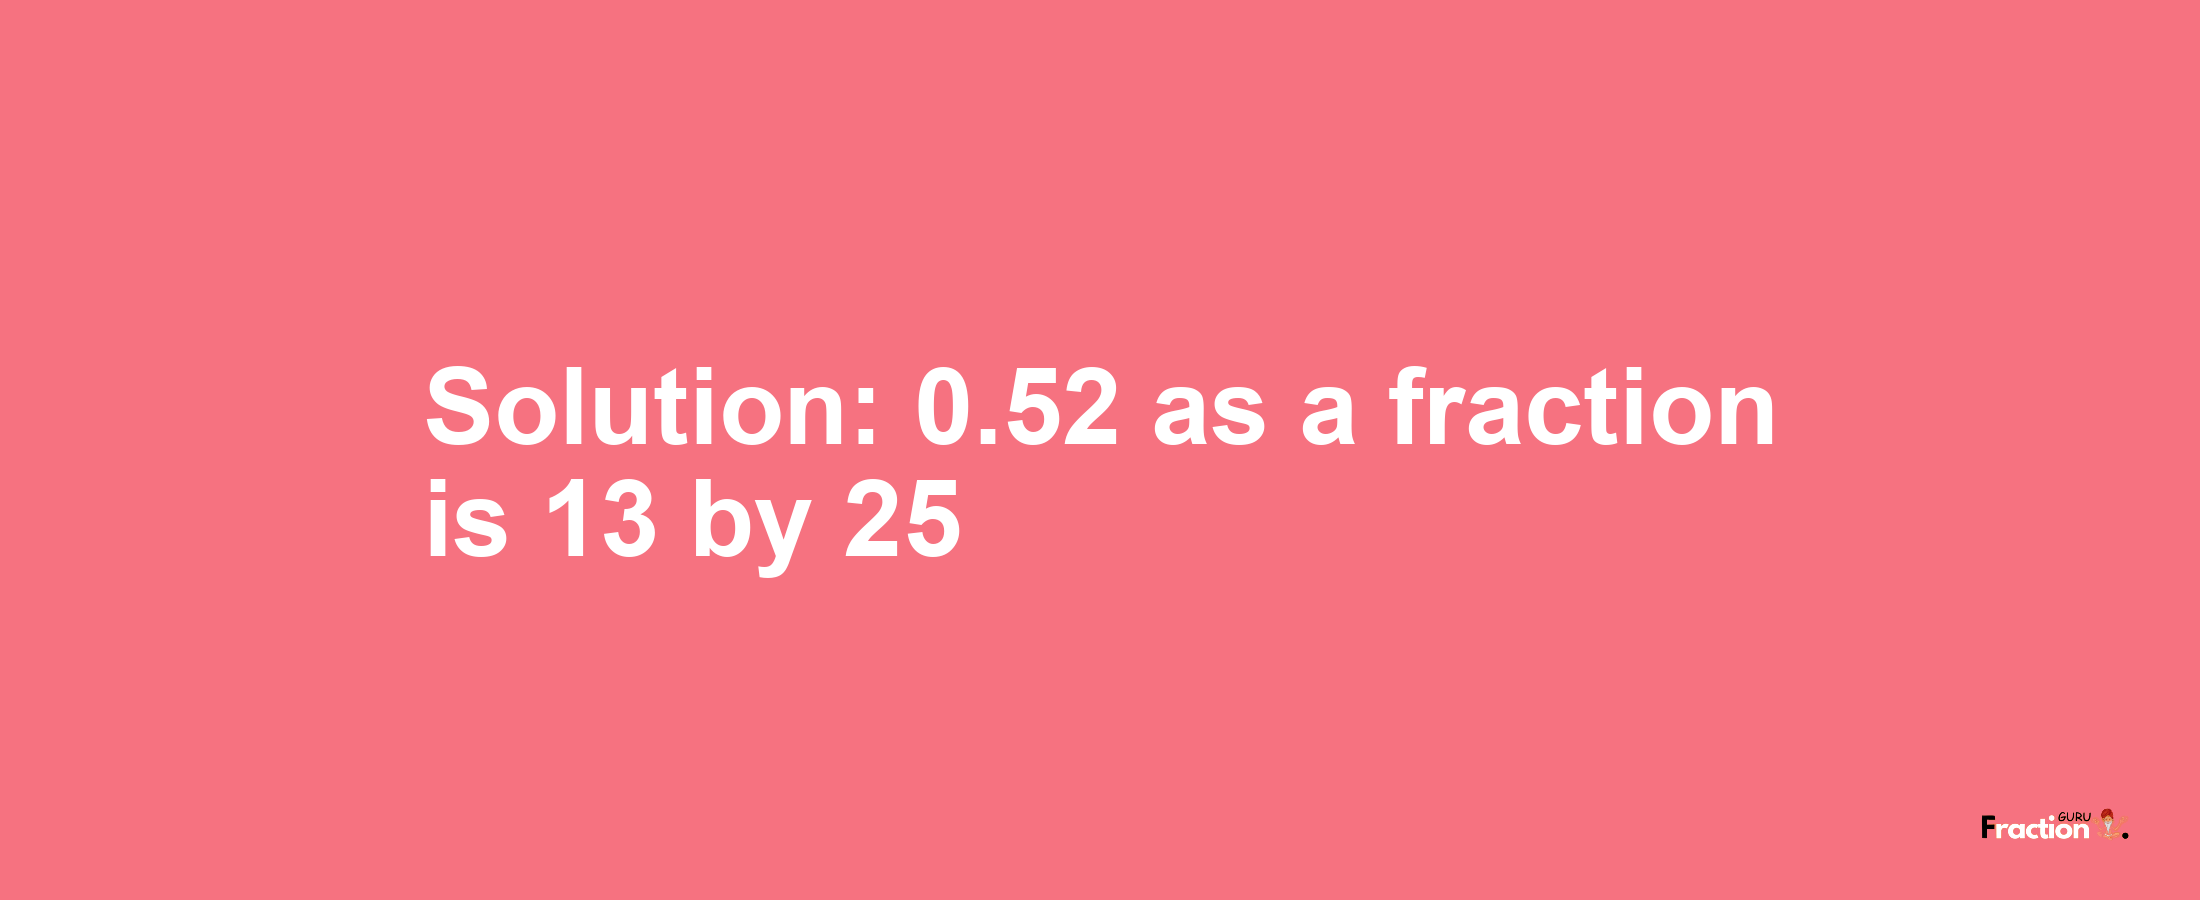 Solution:0.52 as a fraction is 13/25